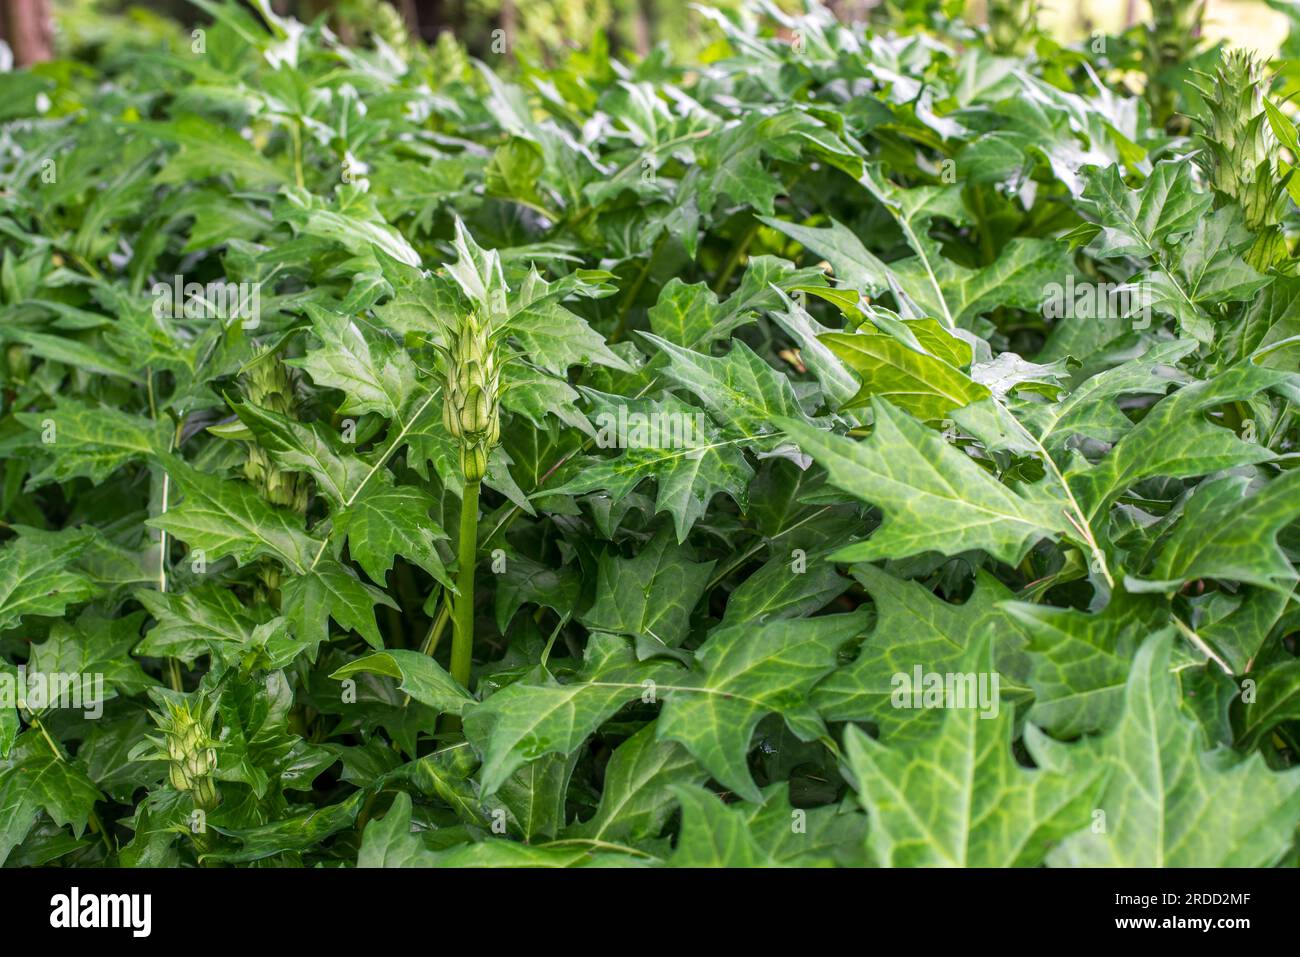 Acanthus balcanicus, is an endemic herbaceous perennial plant in the genus Acanthus, native to the Balkan peninsula, up to Dalmatia. Stock Photo